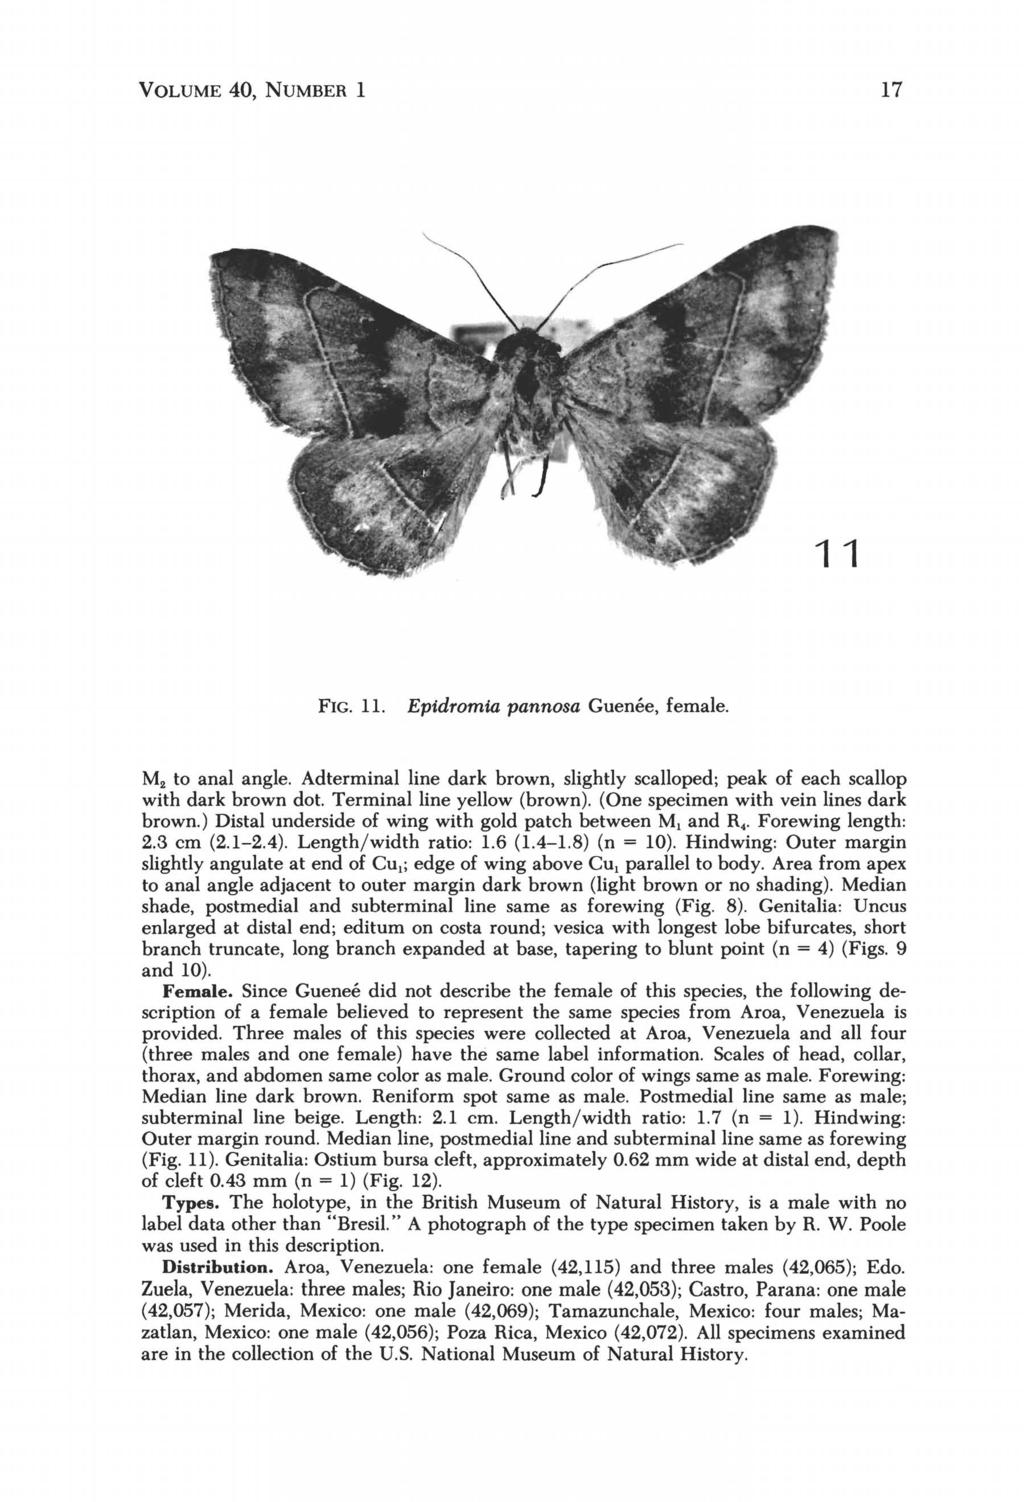 VOLUME 40, NUMBER 1 17 FIG. 1l. Epidromta pannosa Guenee, female. M. to anal angle. Adterminal line dark brown, slightly scalloped; peak of each scallop with dark brown dot.